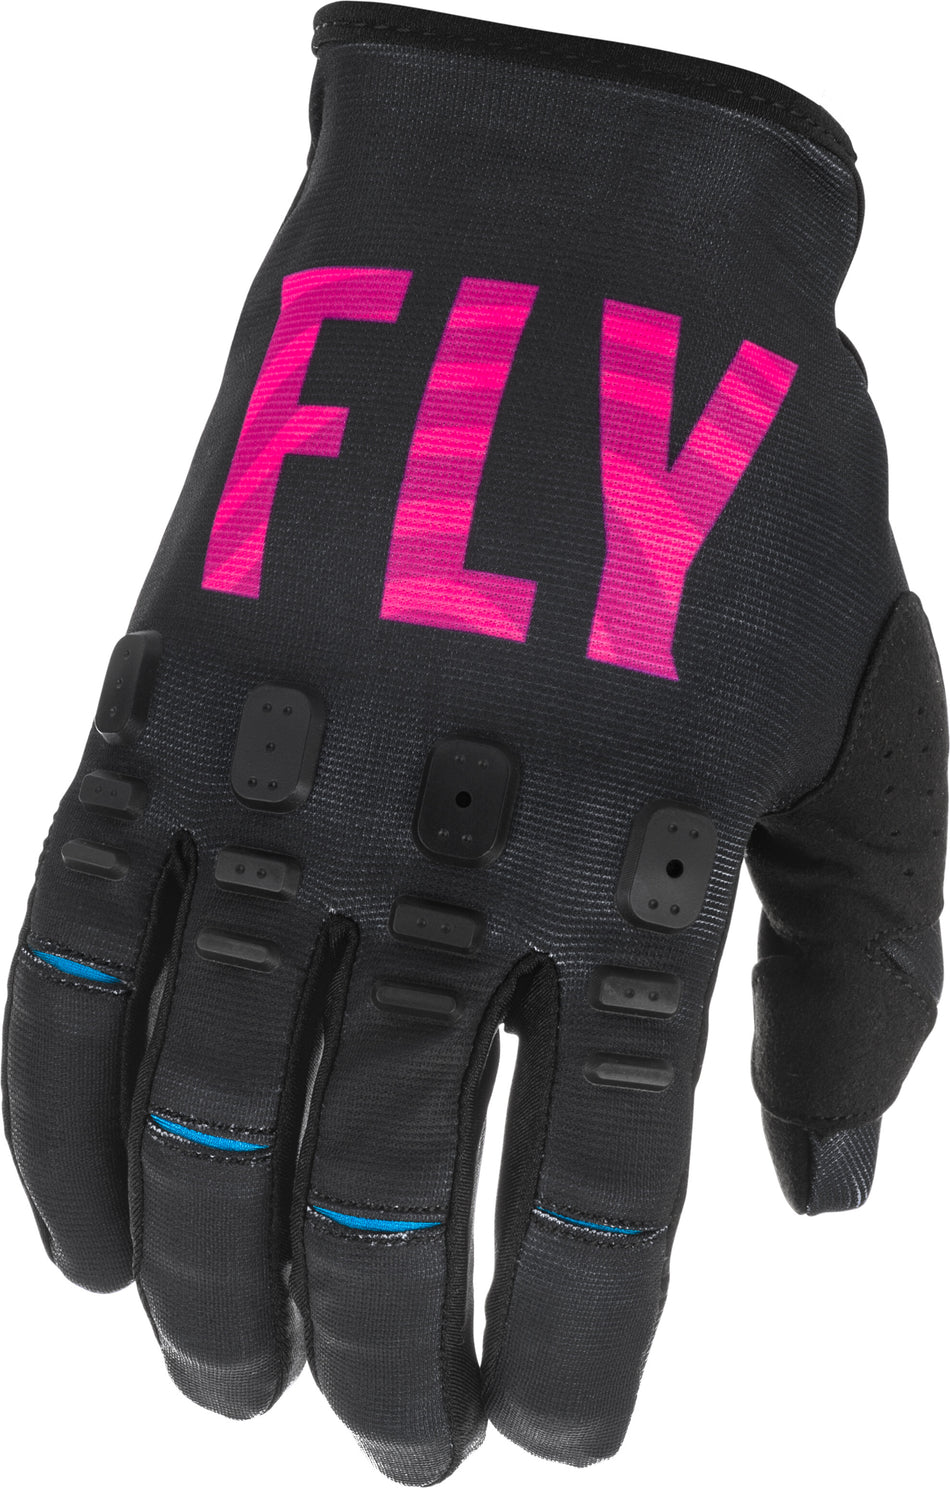 FLY RACING Kinetic S.E. Gloves Black/Pink/Blue Sz 07 374-51907